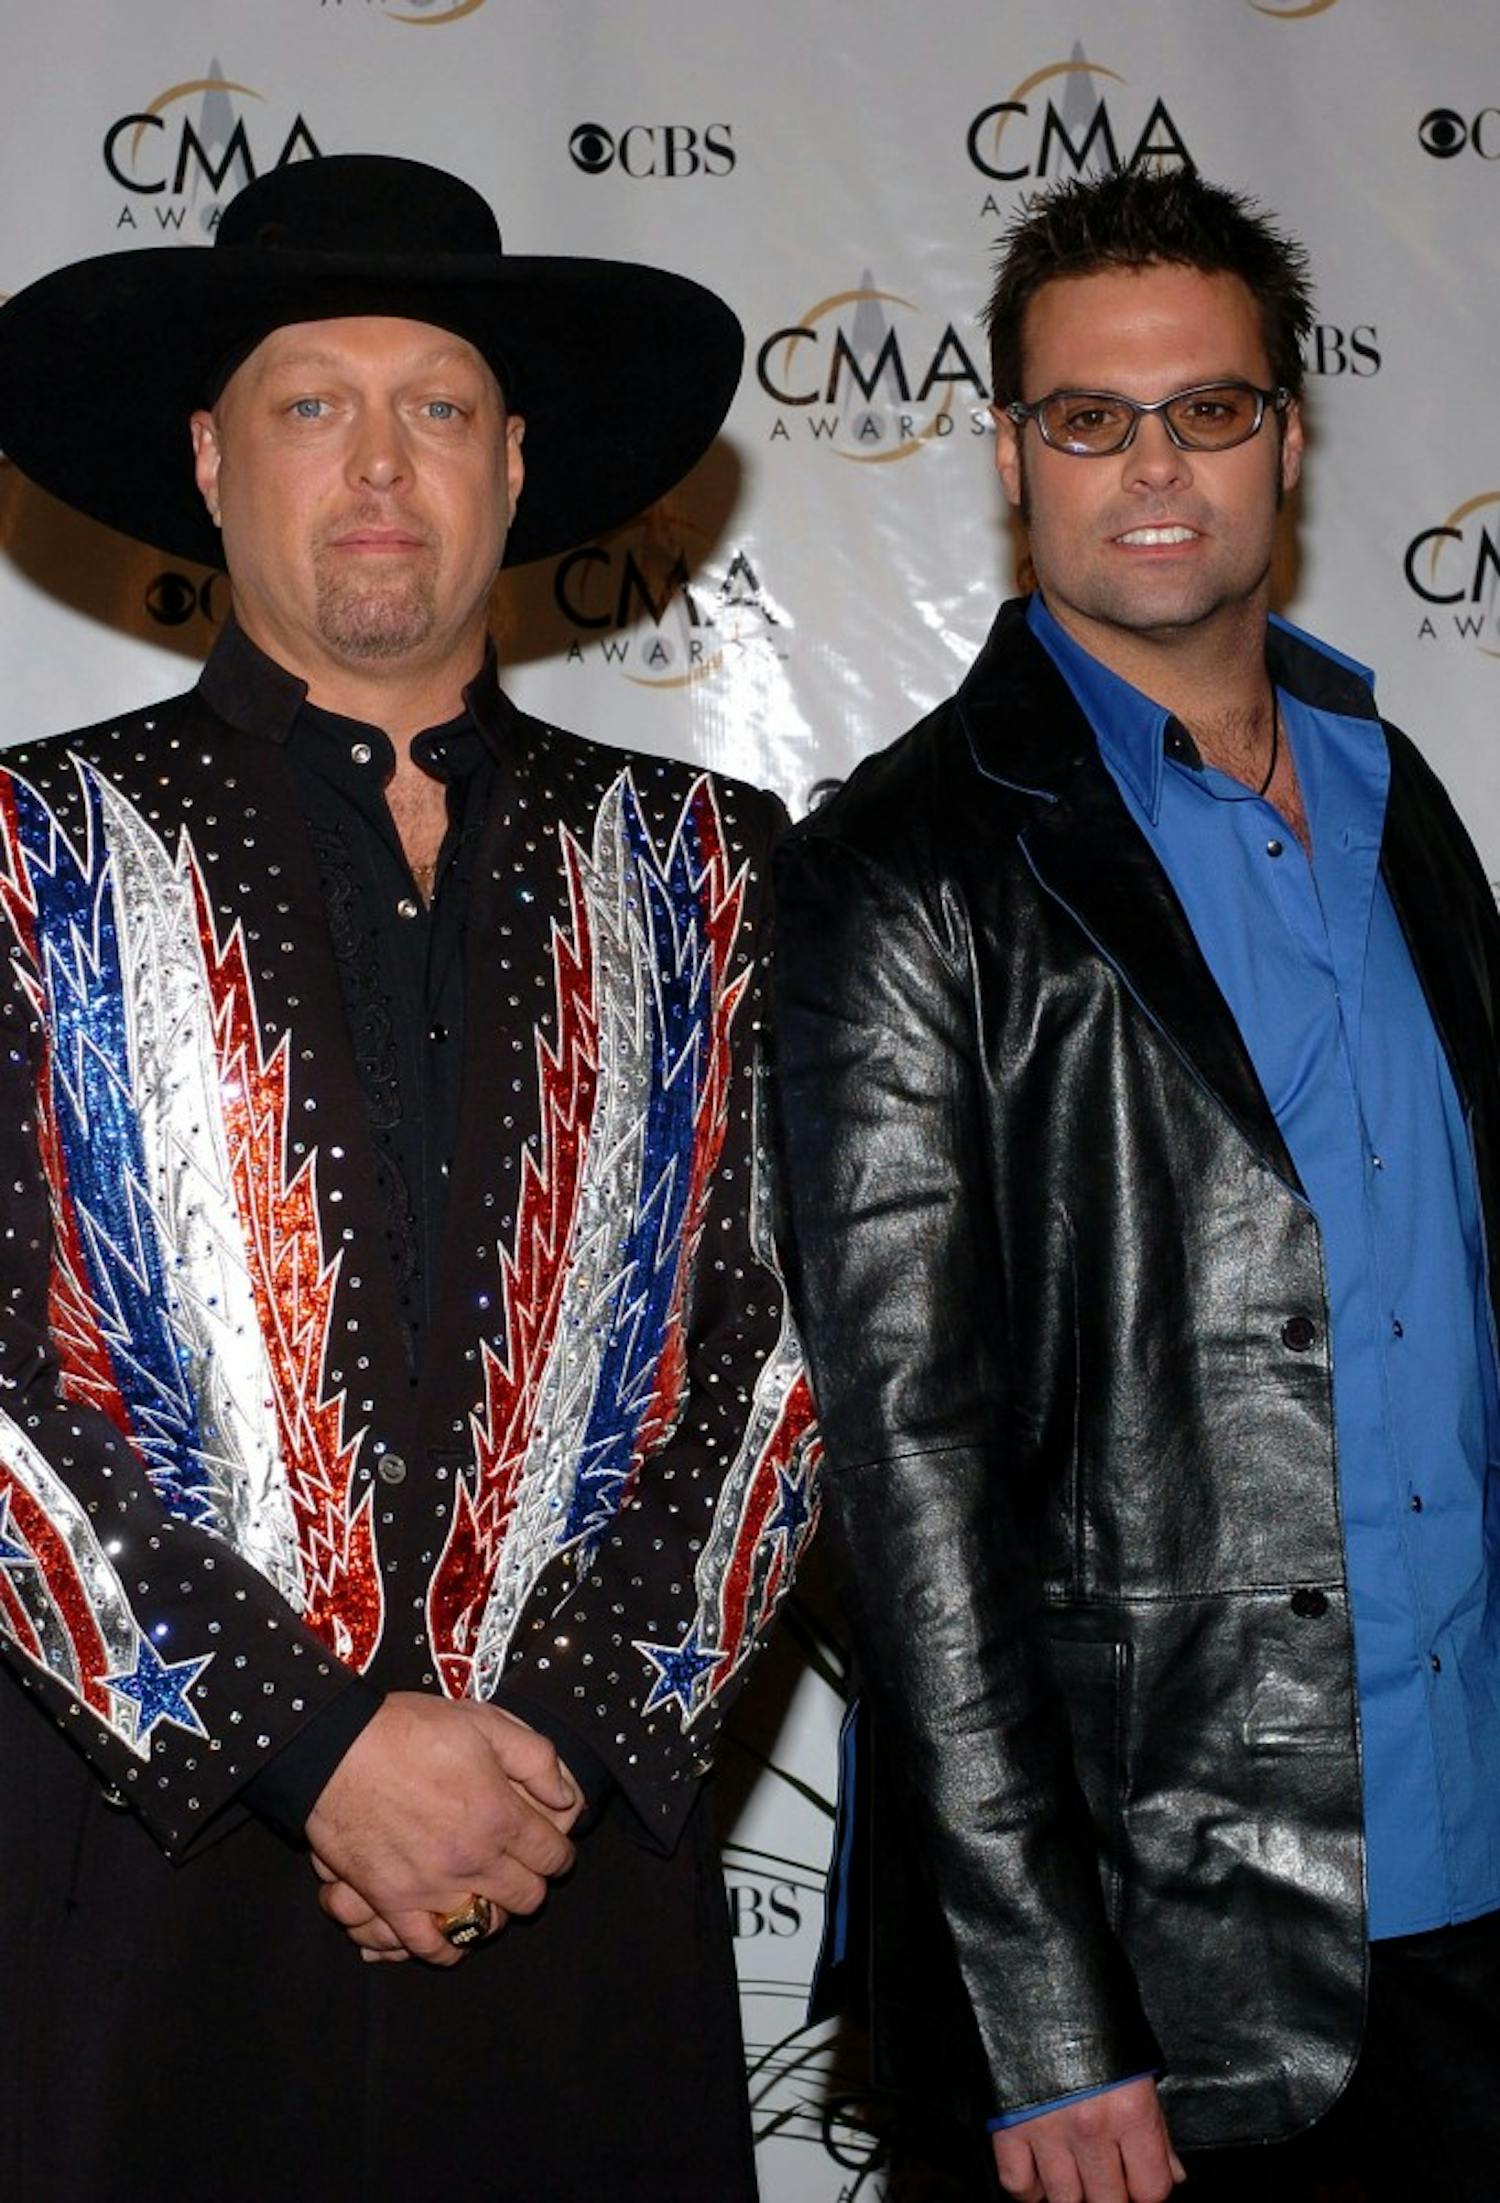 KRT ENTERTAINMENT STAND ALONE PHOTO SLUGGED: COUNTRYMUSICAWARDS KRT PHOTOGRAPH BY NICOLAS KHAYAT/ABACA PRESS (November 10) Eddy Montgomery and Troy Gentry of Montgomery Gentry arrive at the 38th annual Country Music Awards, held at the Grand Ole Opry in Nashville, Tennessee, on Tuesday, November 9, 2004. (lde) 2004